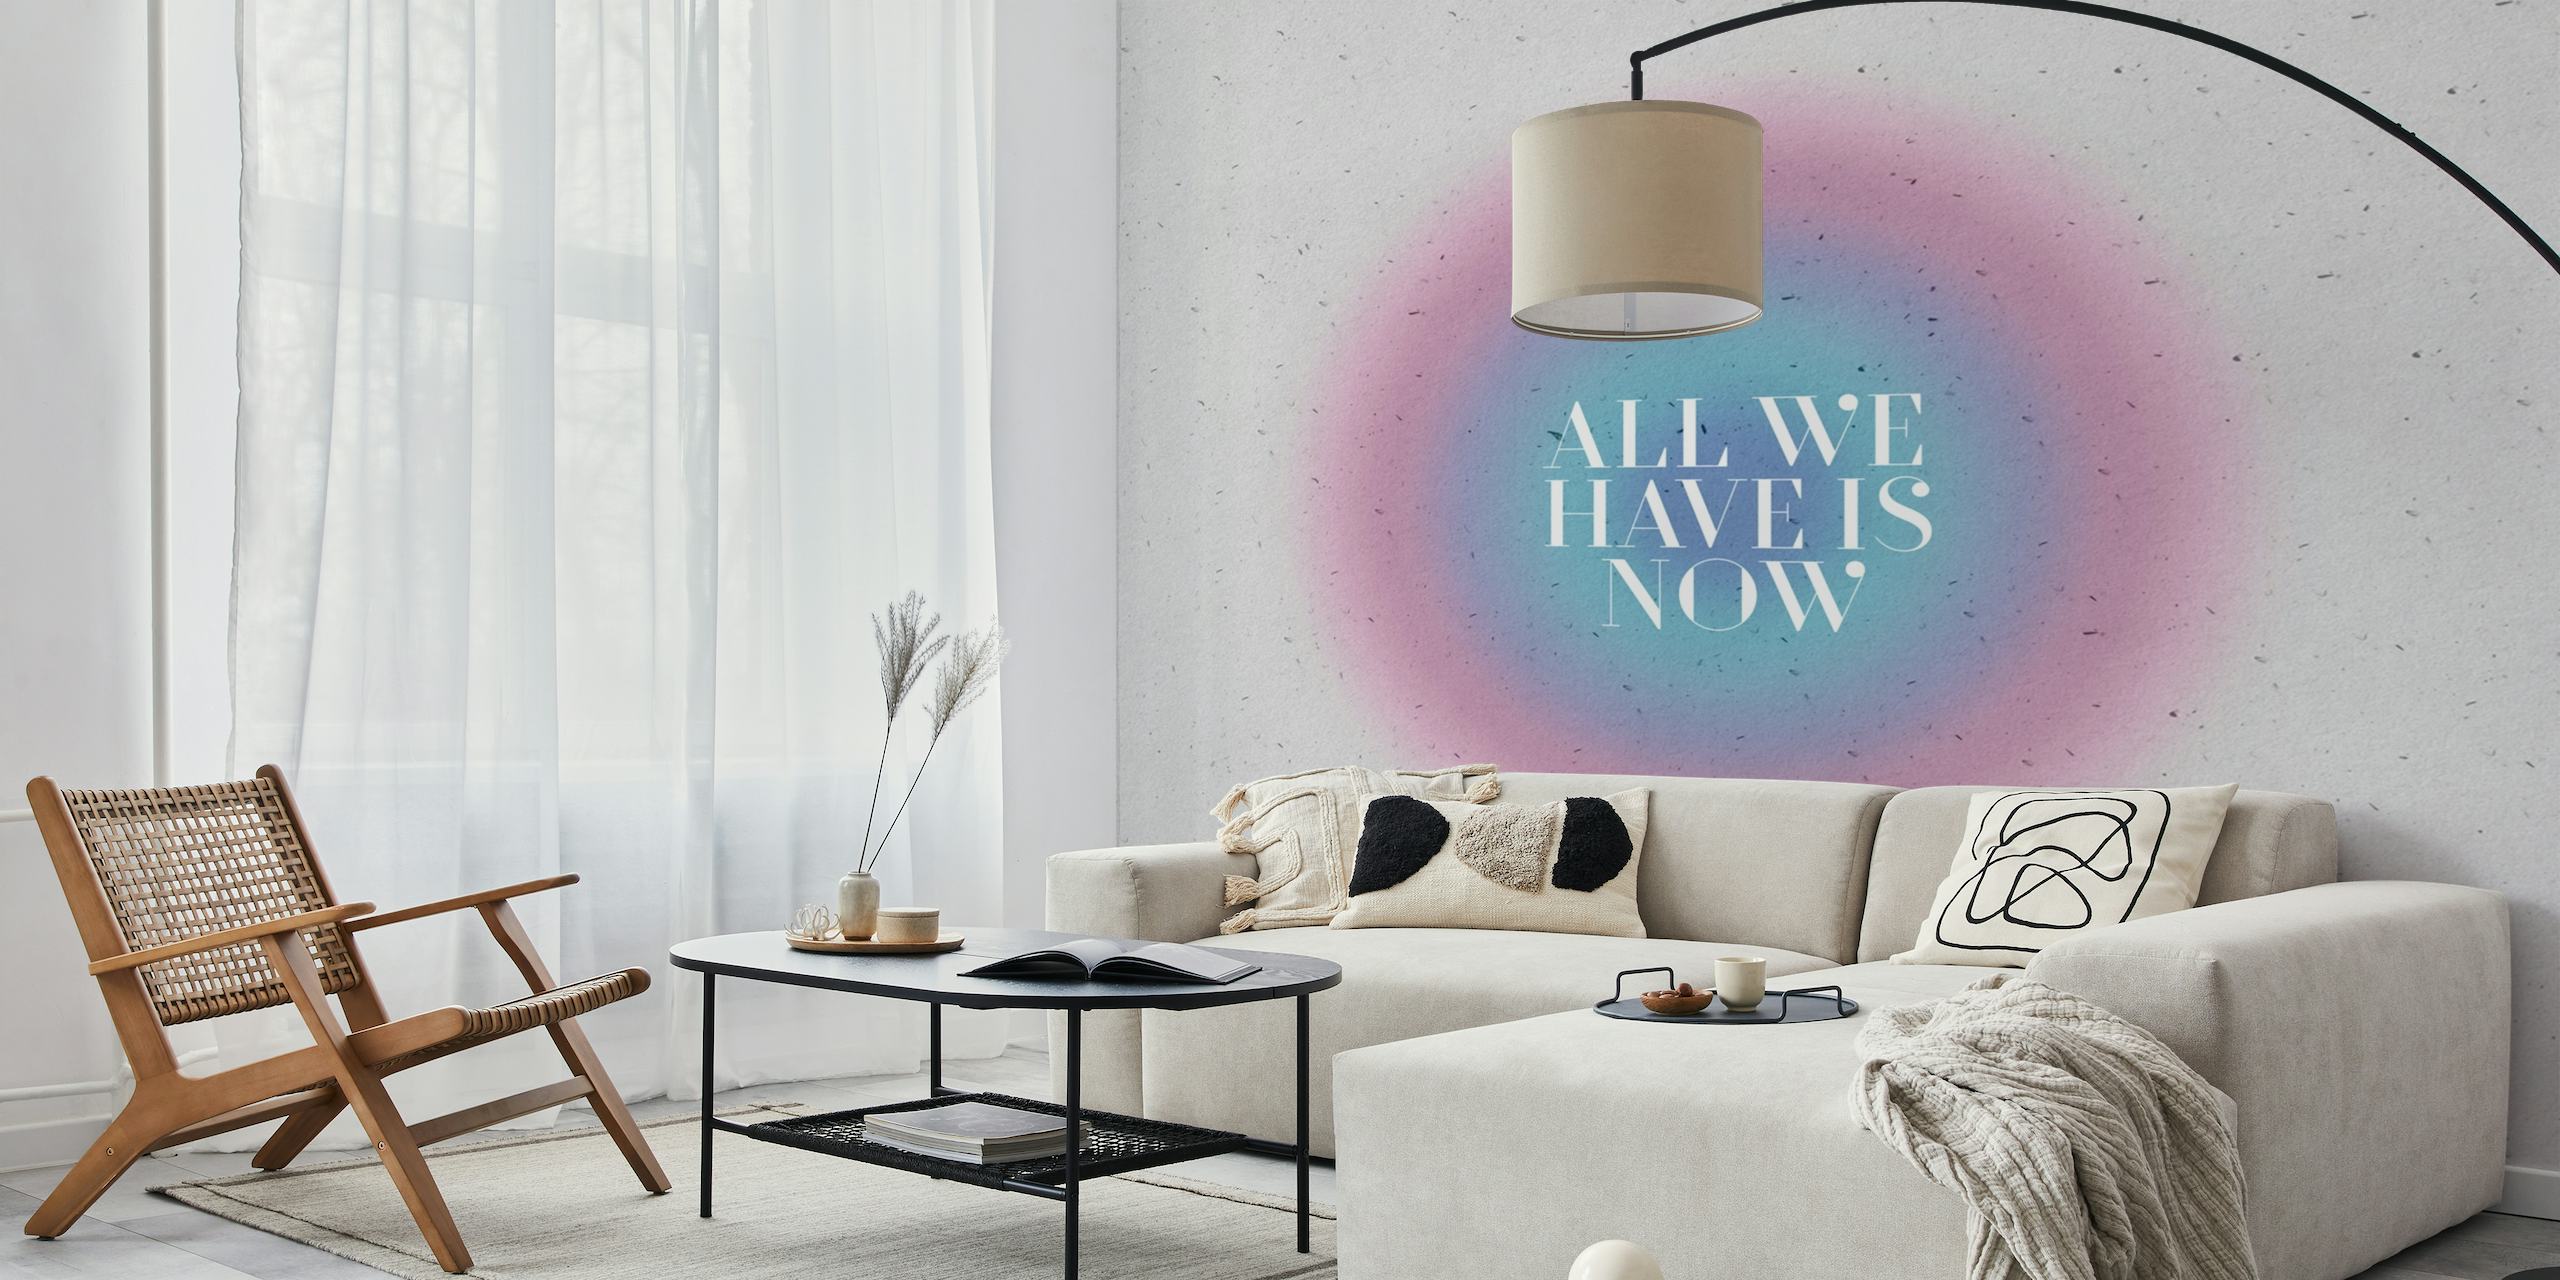 All We Have is Now wall mural with soft pink and violet hues and inspirational text